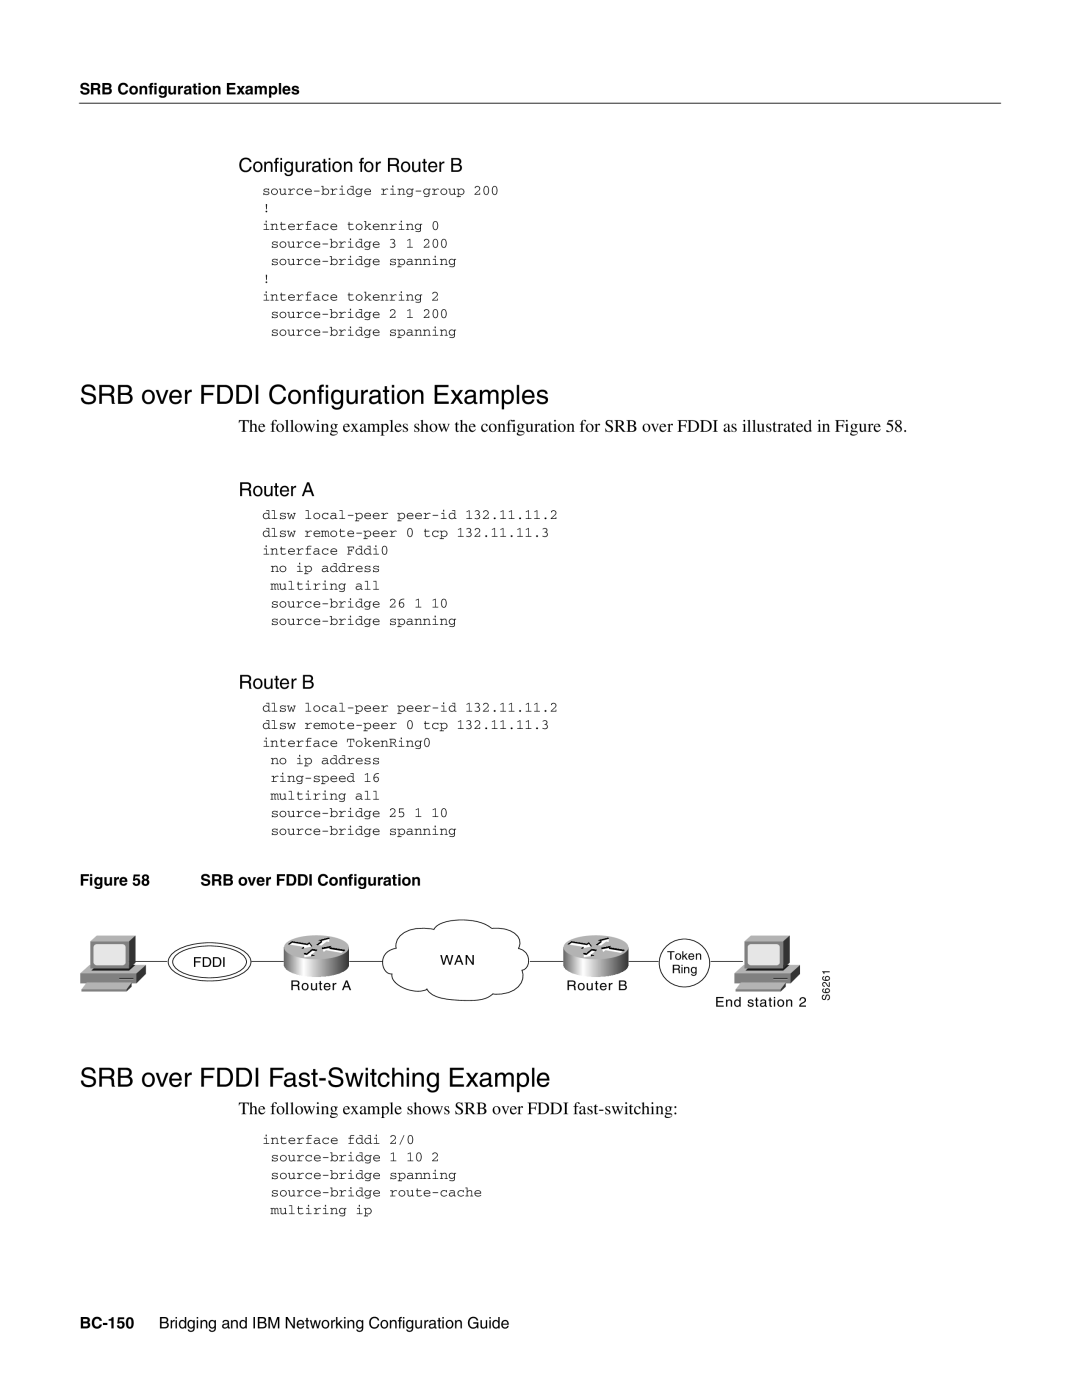 Cisco Systems BC-109 manual SRB over FDDI Configuration Examples, SRB over FDDI Fast-Switching Example, Router A, Router B 